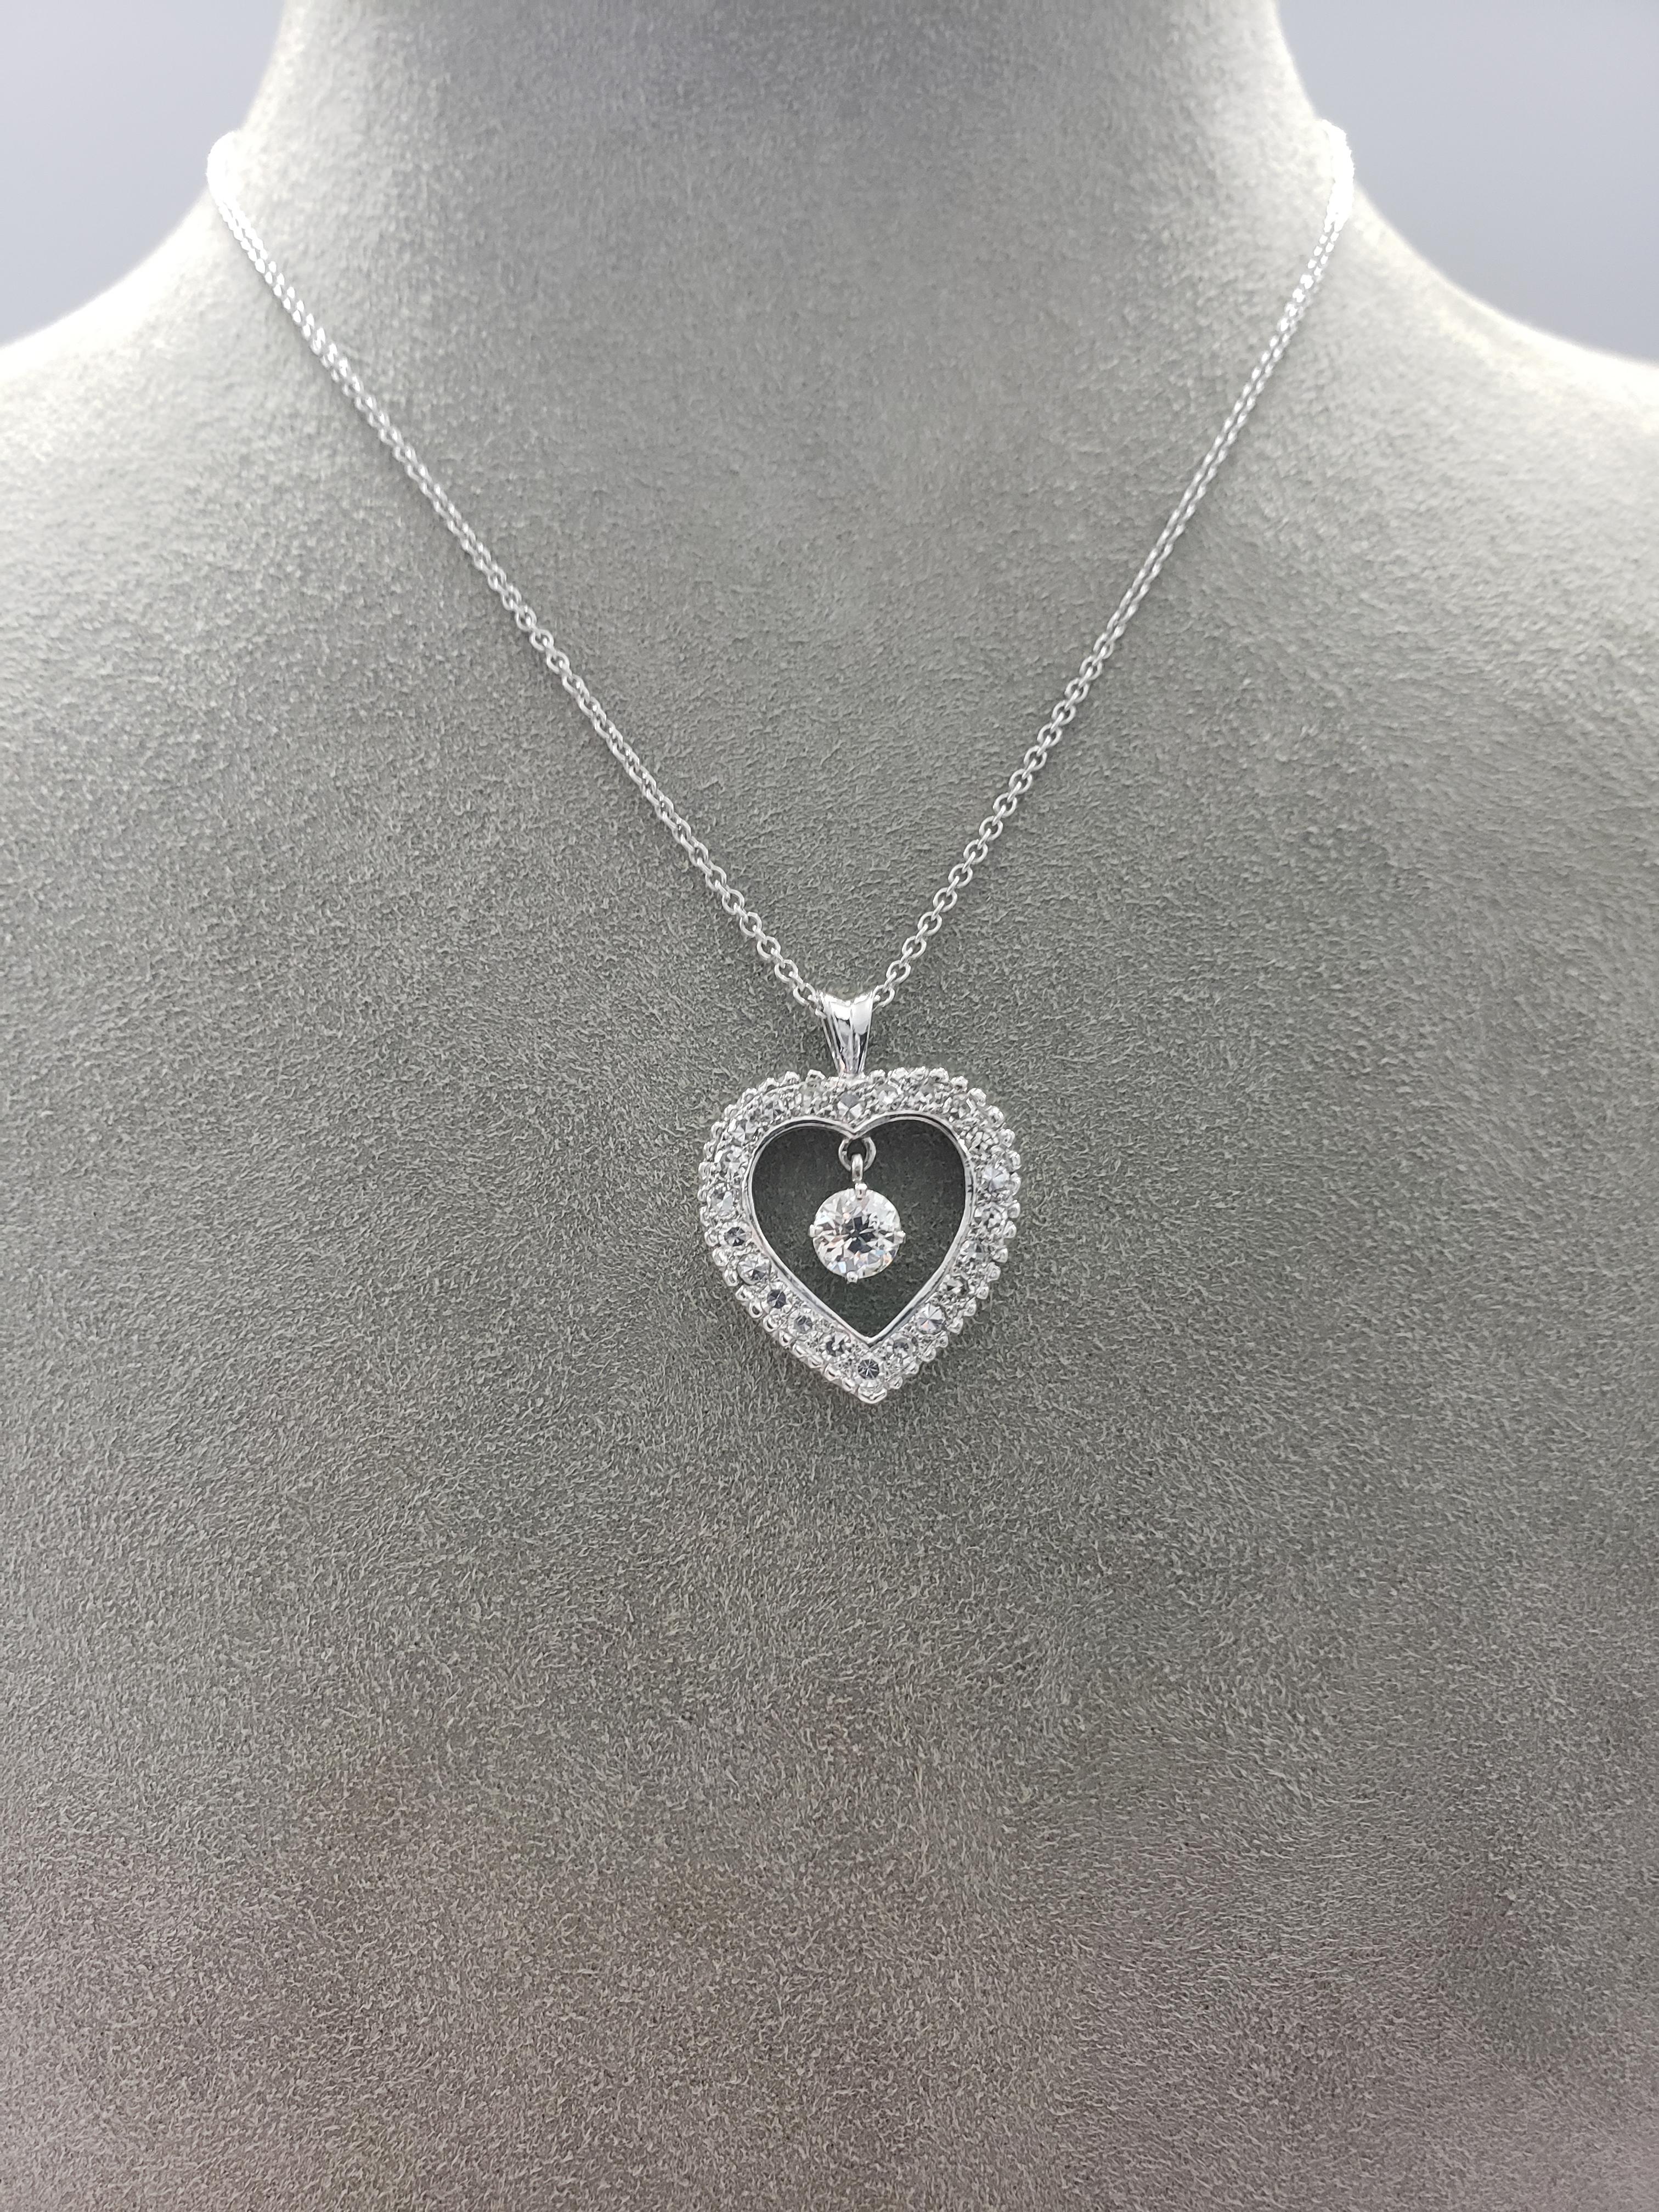 Women's Roman Malakov 1.81 Old Mine and French Cut Diamonds Heart Shape Pendant Necklace For Sale